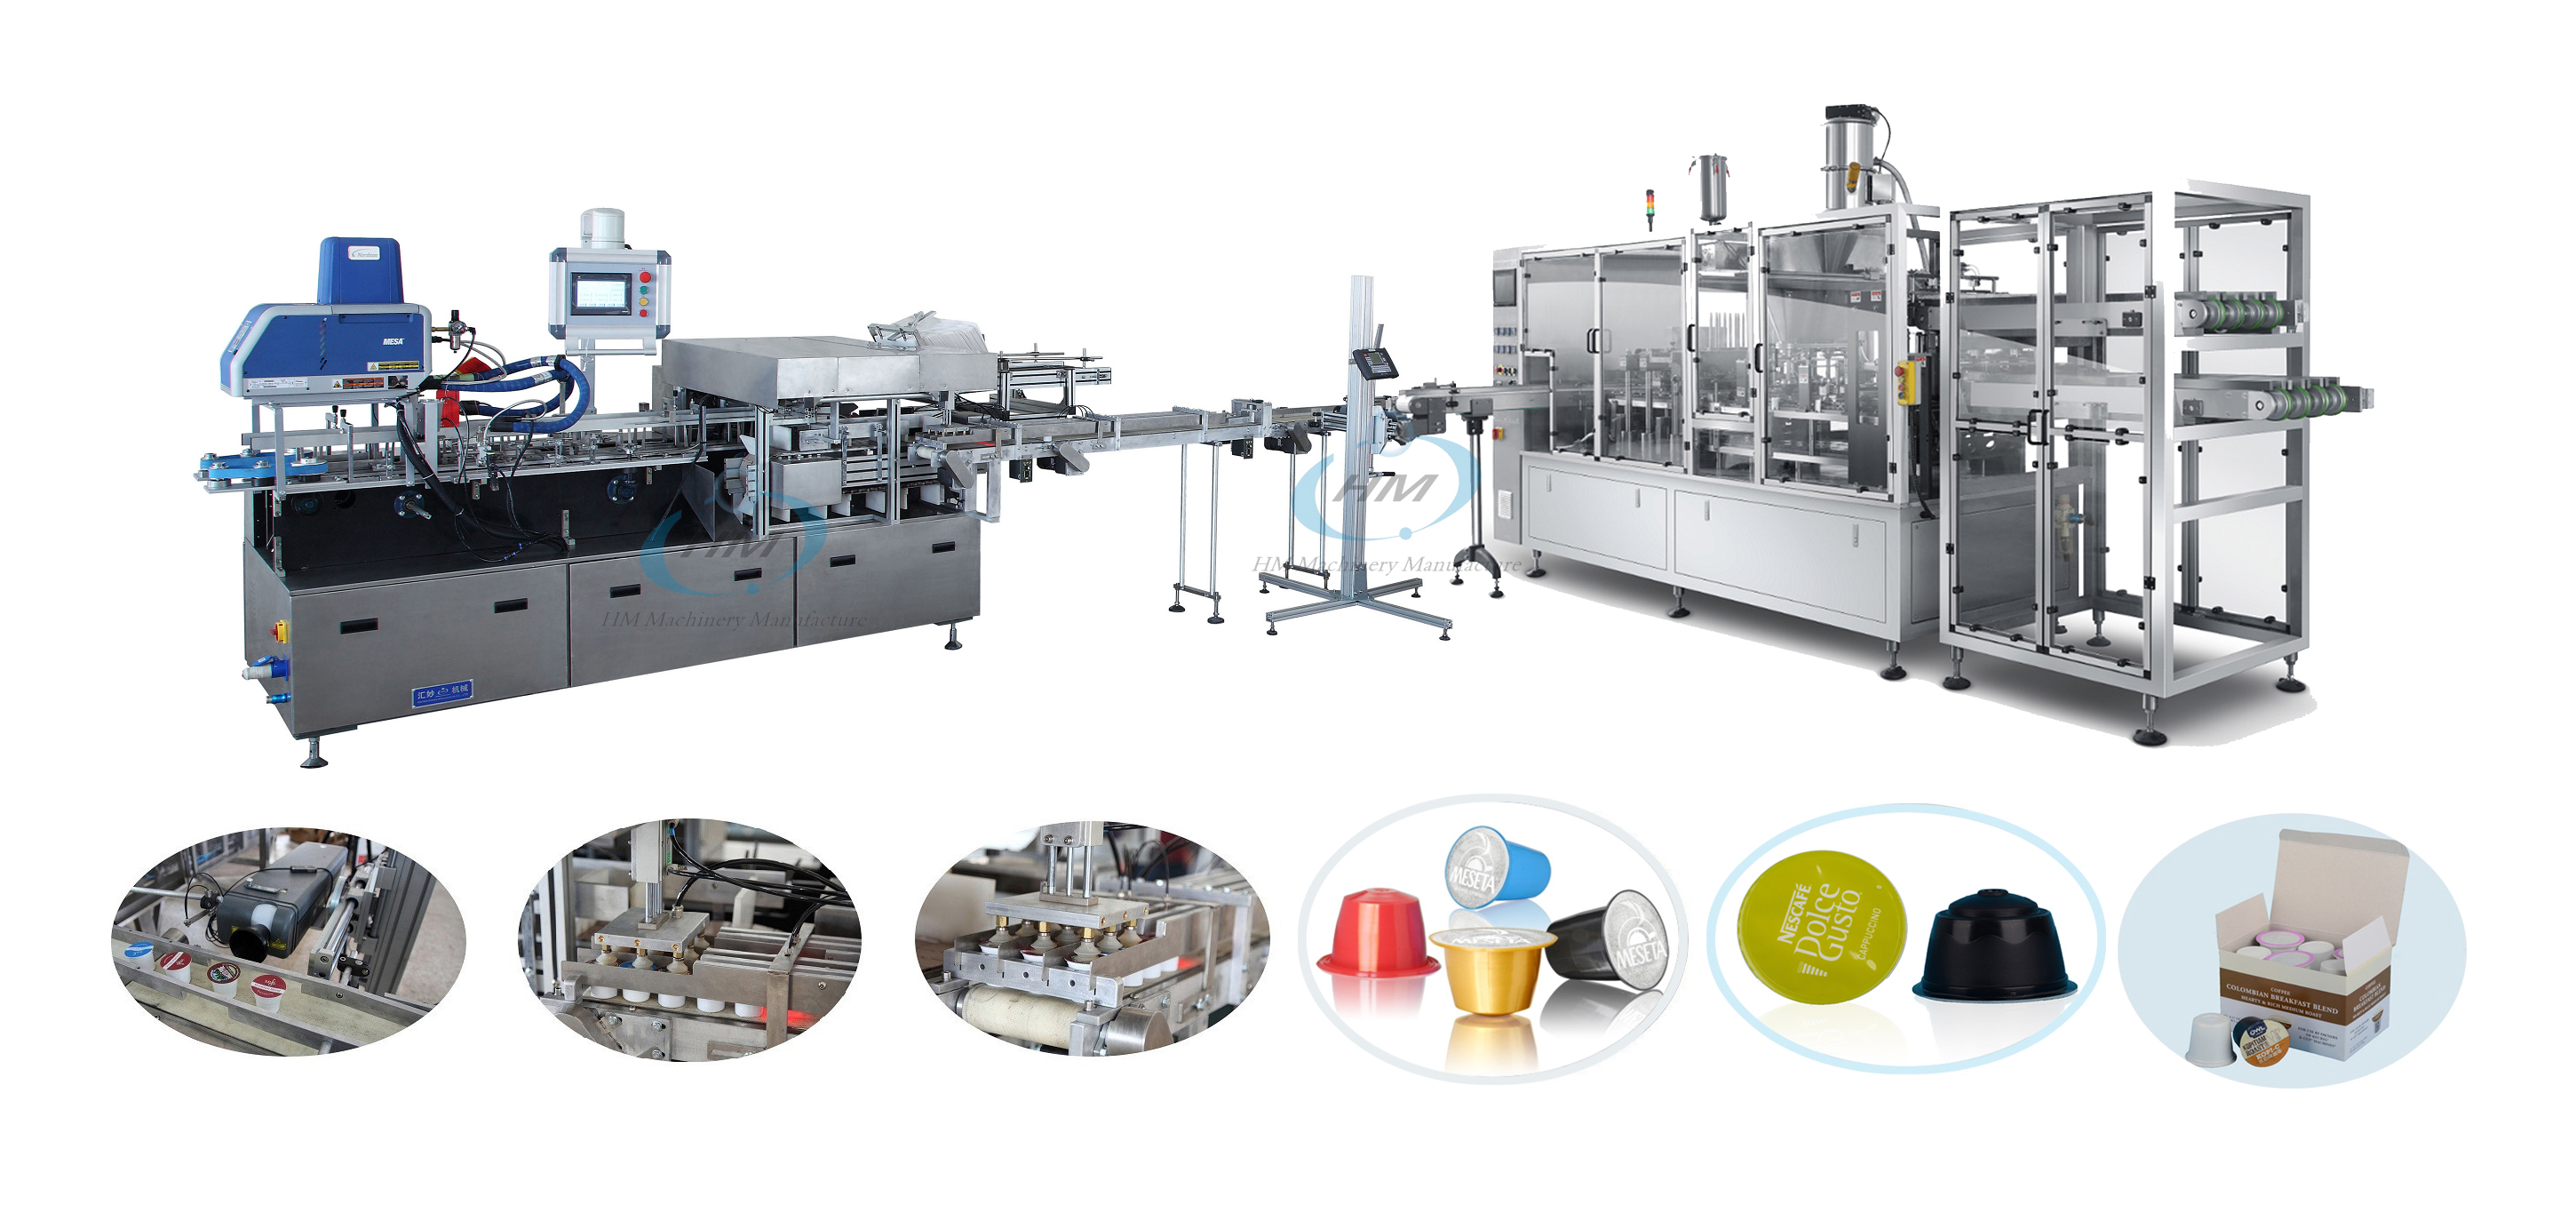 K cup carton packing line